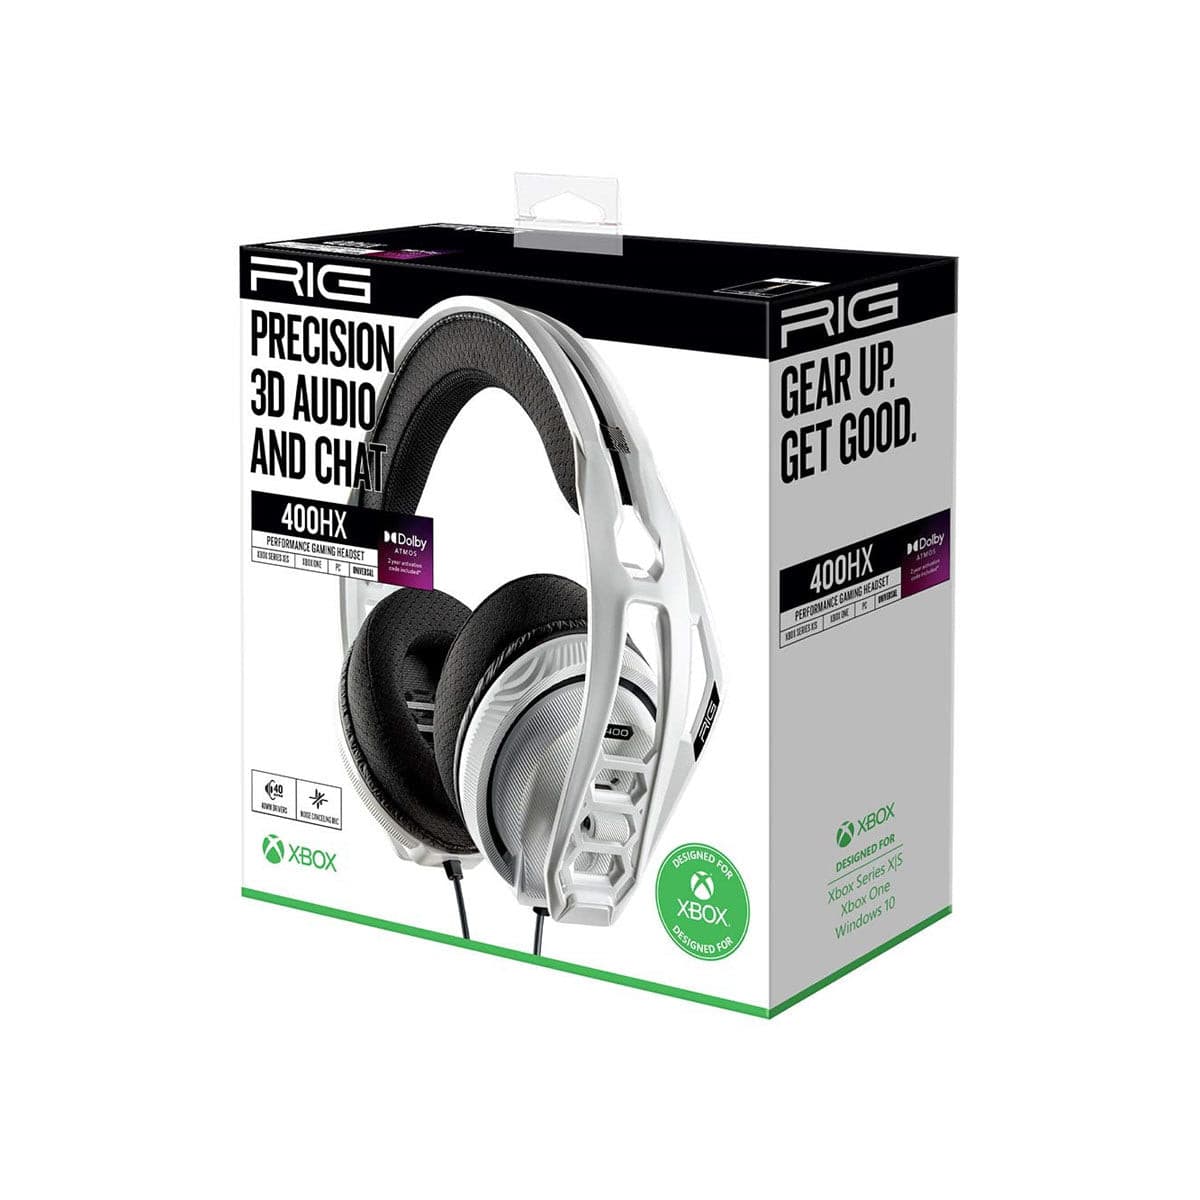 Rig 400 HX White V2 Gaming Headset For Xbox Series X|S and Xbox One.